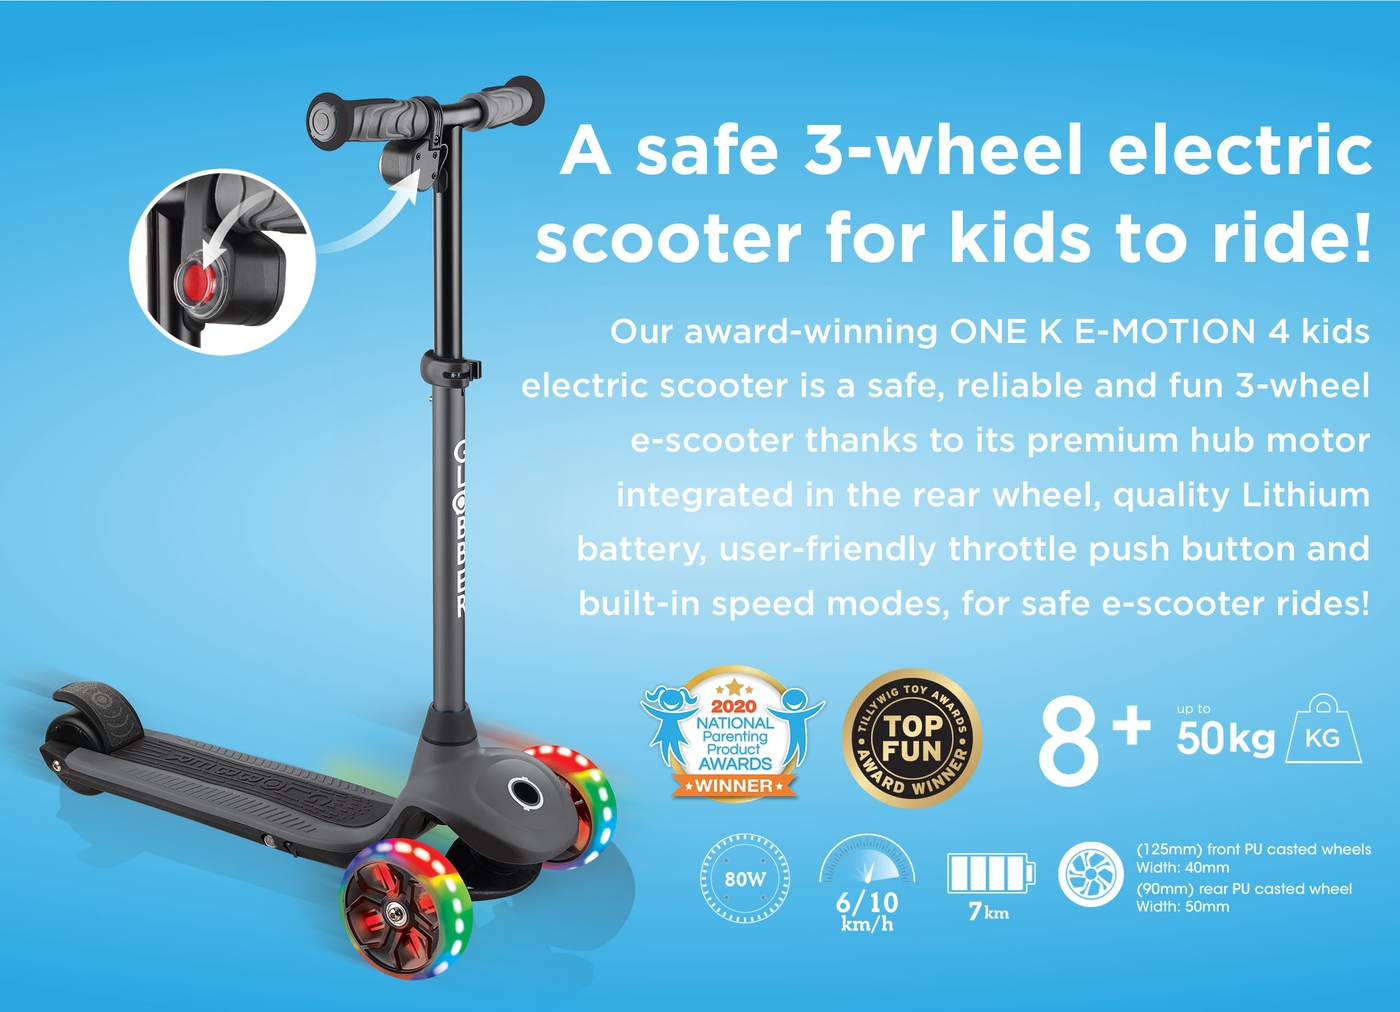 A safe 3-wheel electric scooter for kids to ride!